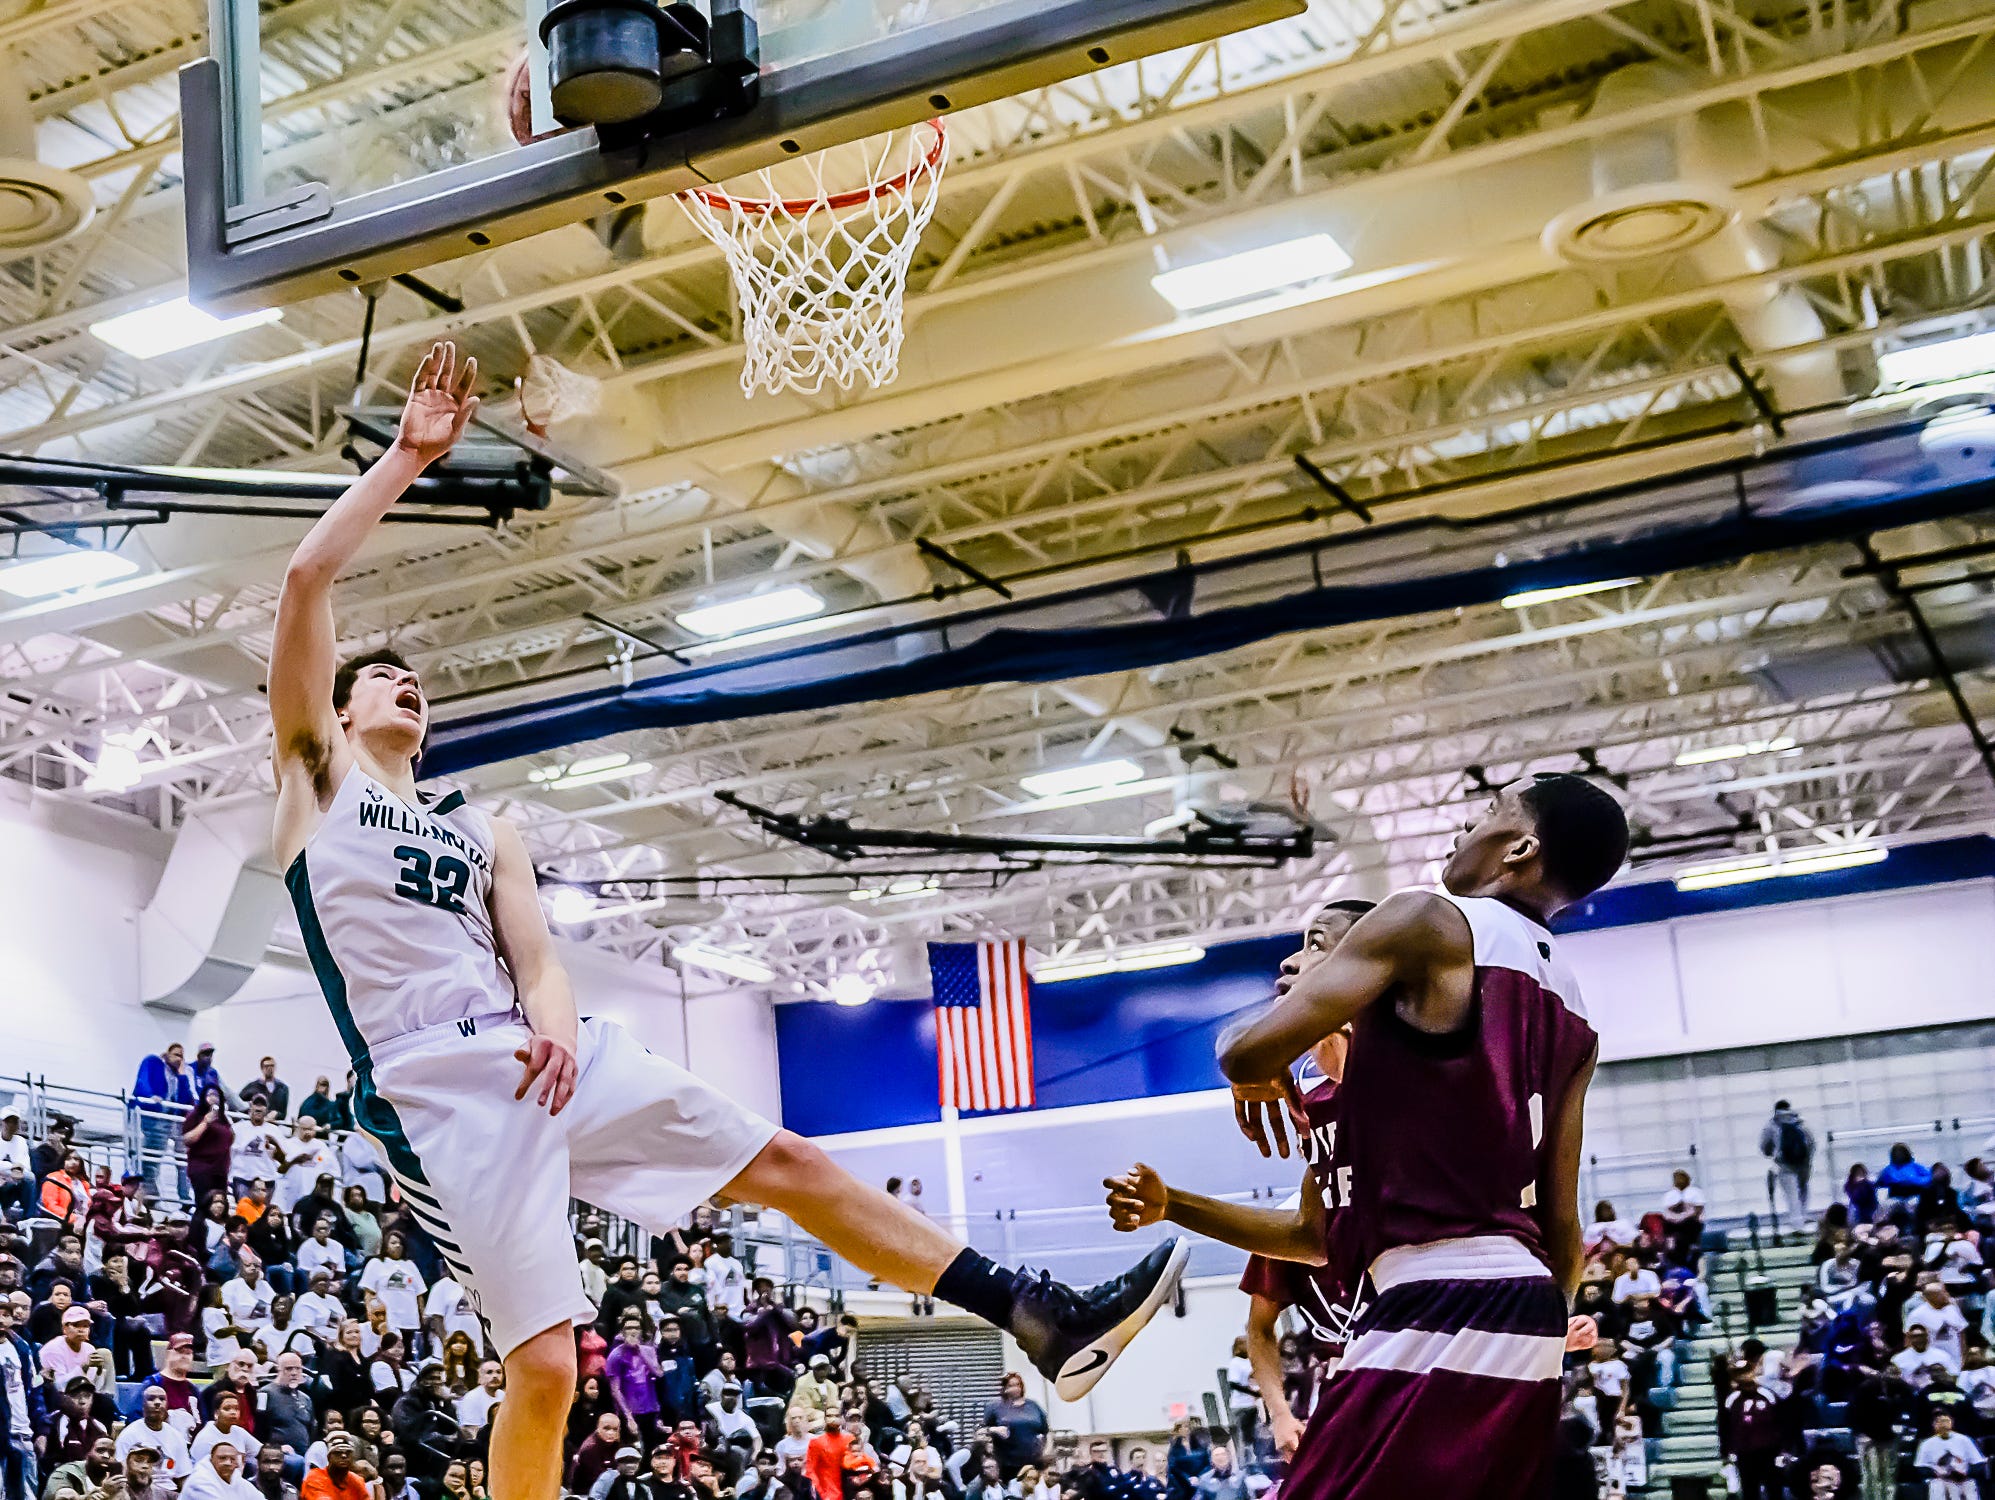 Sean Cobb ,left, of Williamston lays the ball in over River Rouge defenders to put Williamston up 50-49 with 1:15 remaining in their Class B state quarterfinal game Tuesday March 21, 2017 at Chelsea High School in Chelsea. KEVIN W. FOWLER PHOTO